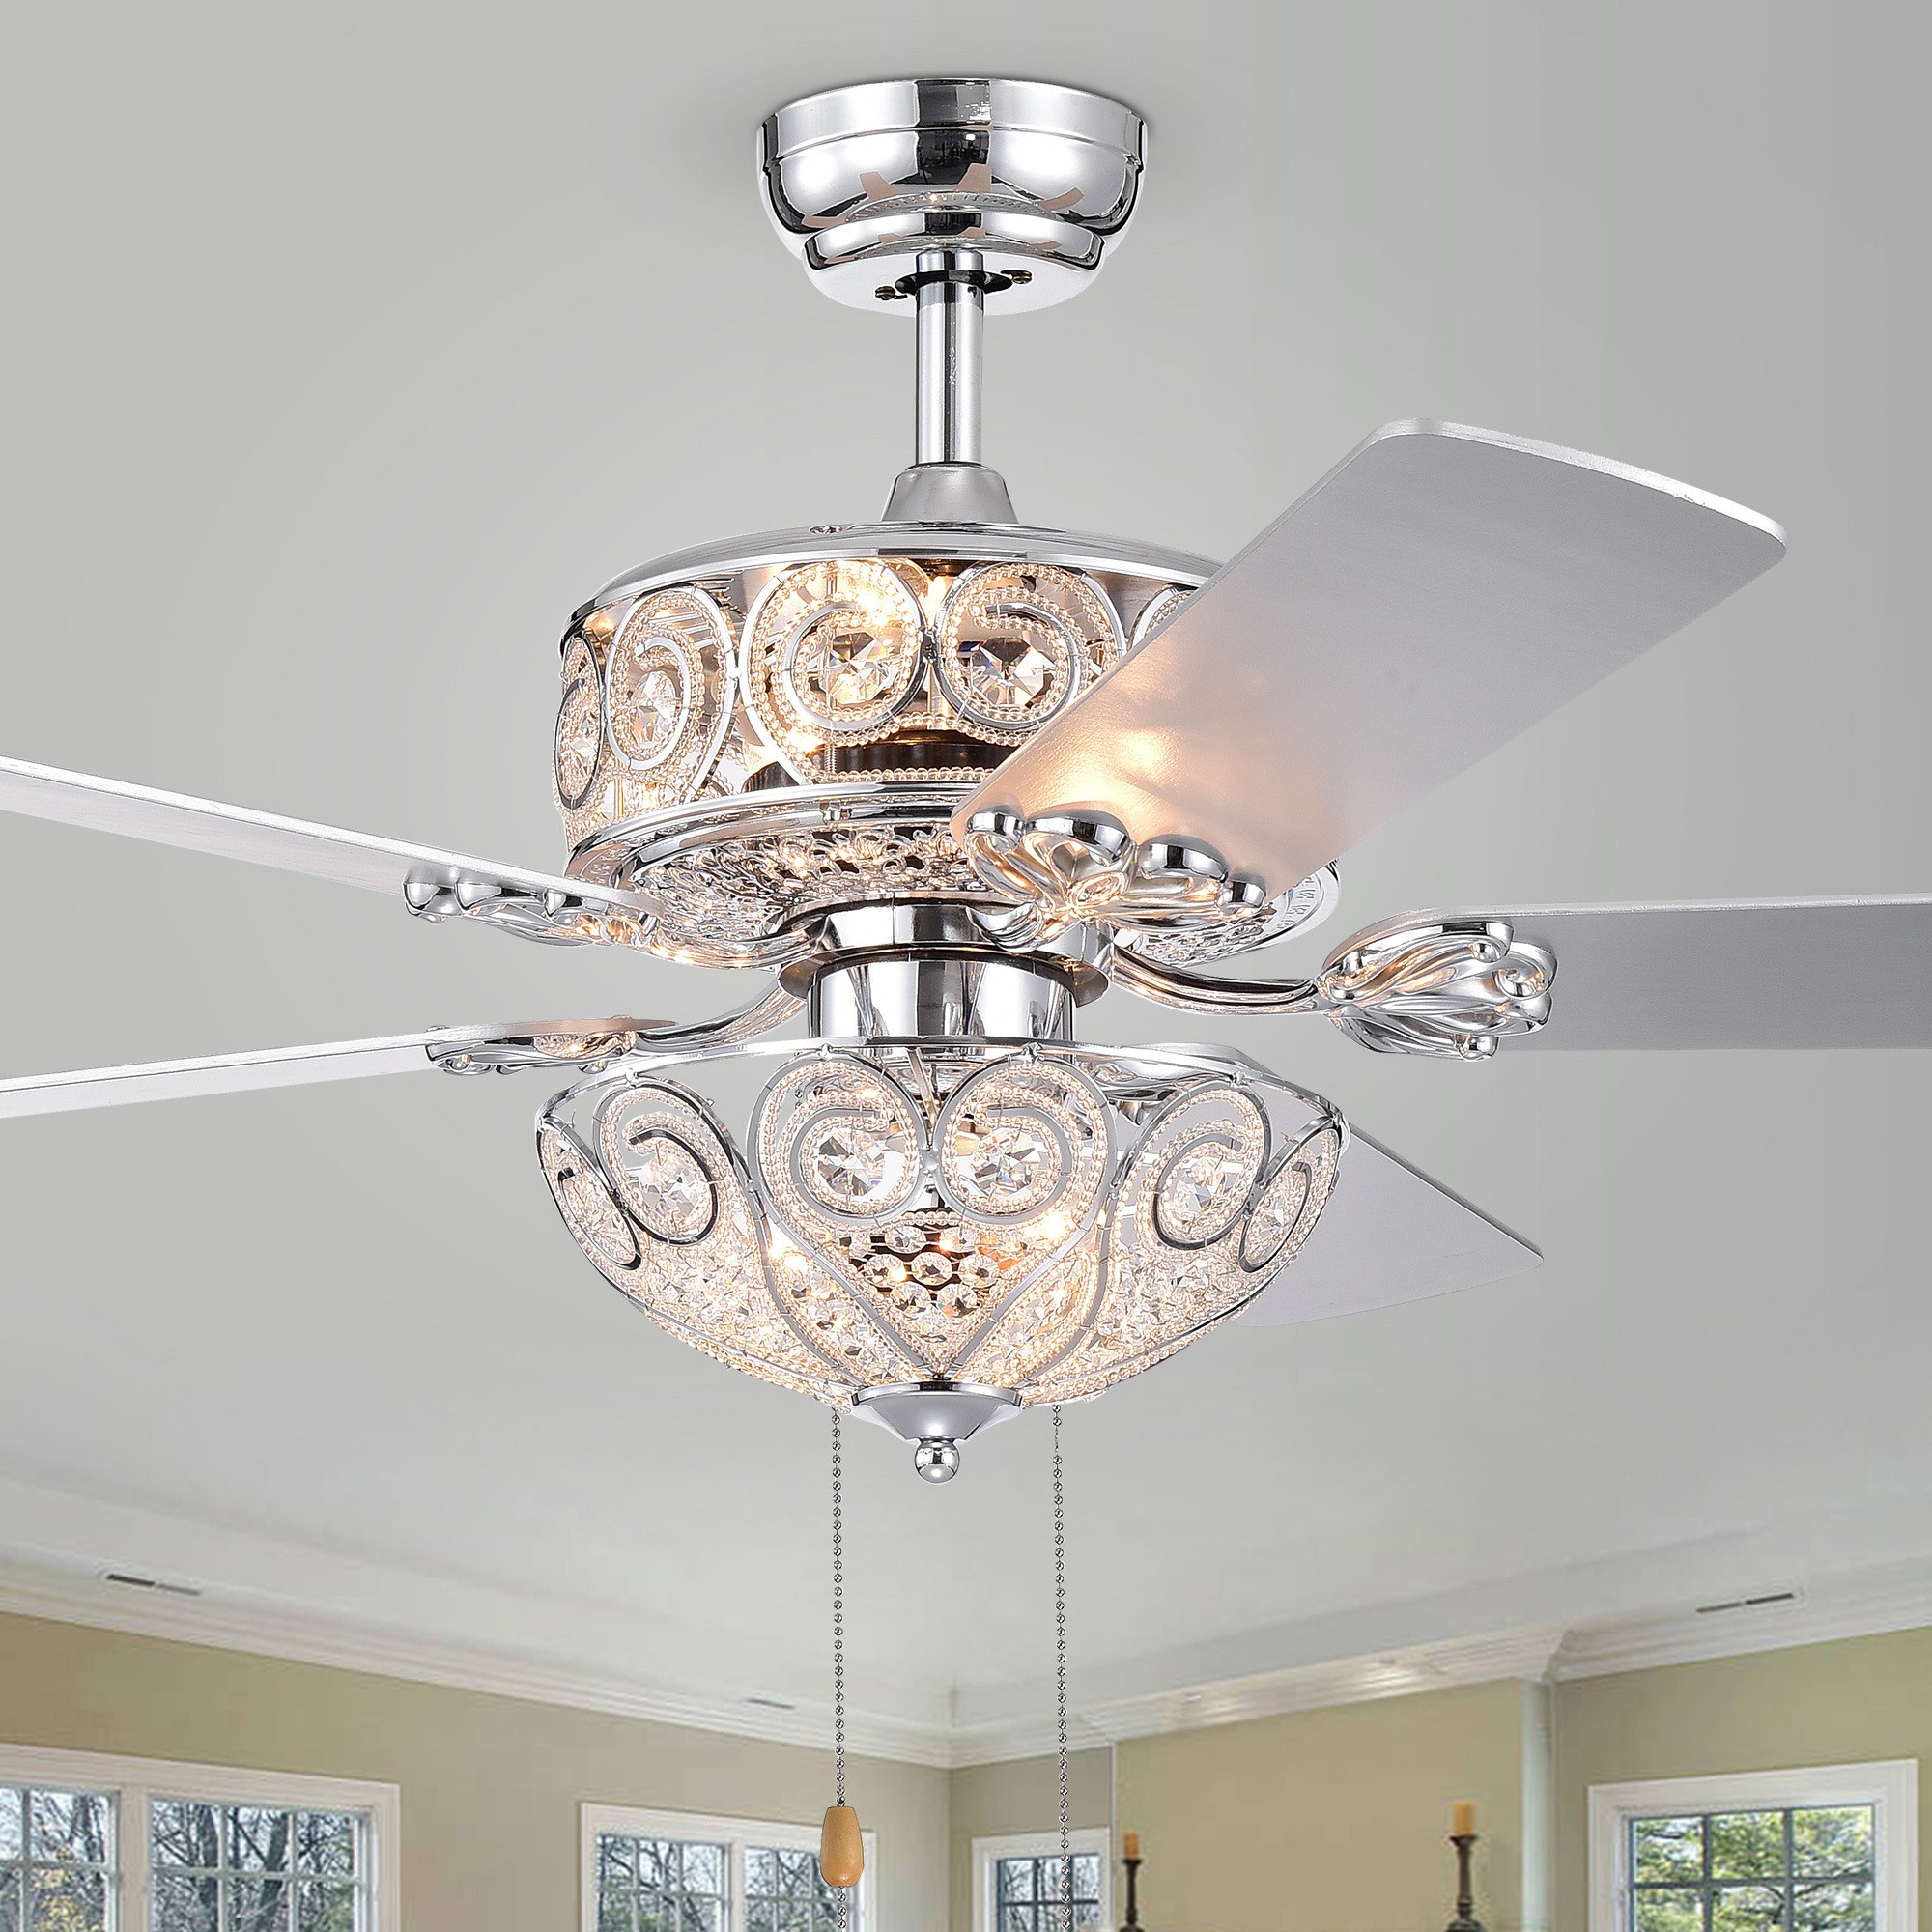 Indoor Chrome Finish Hand Pull Chain Ceiling Fan with Light Kit